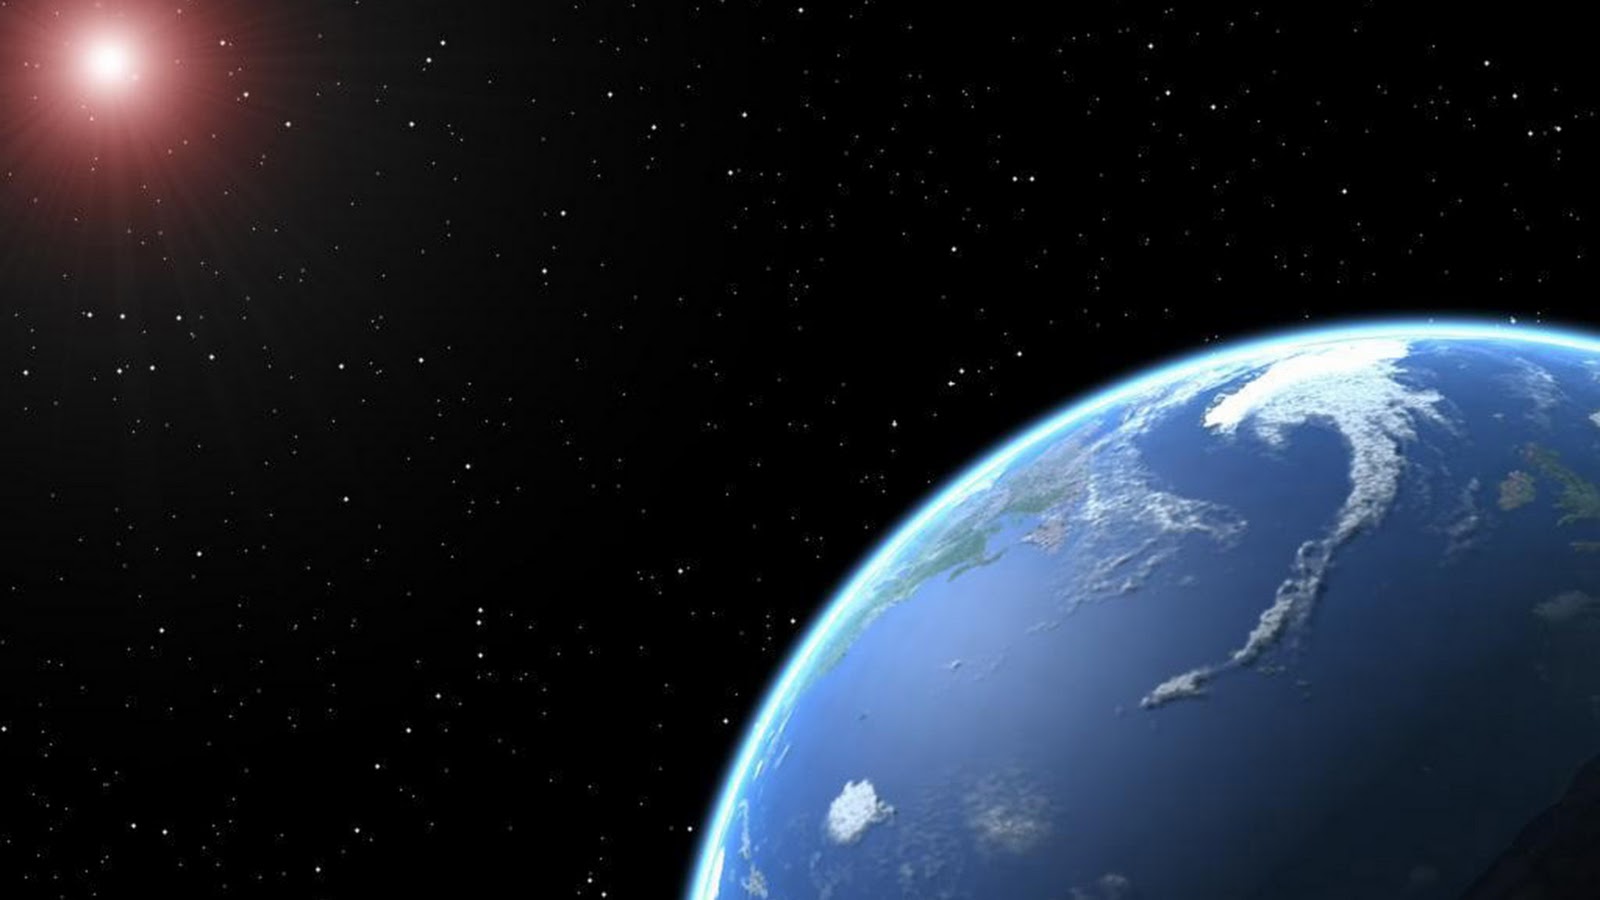  space wallpapers 0o hd space wallpaper blue earth from outer spacejpg 1600x900